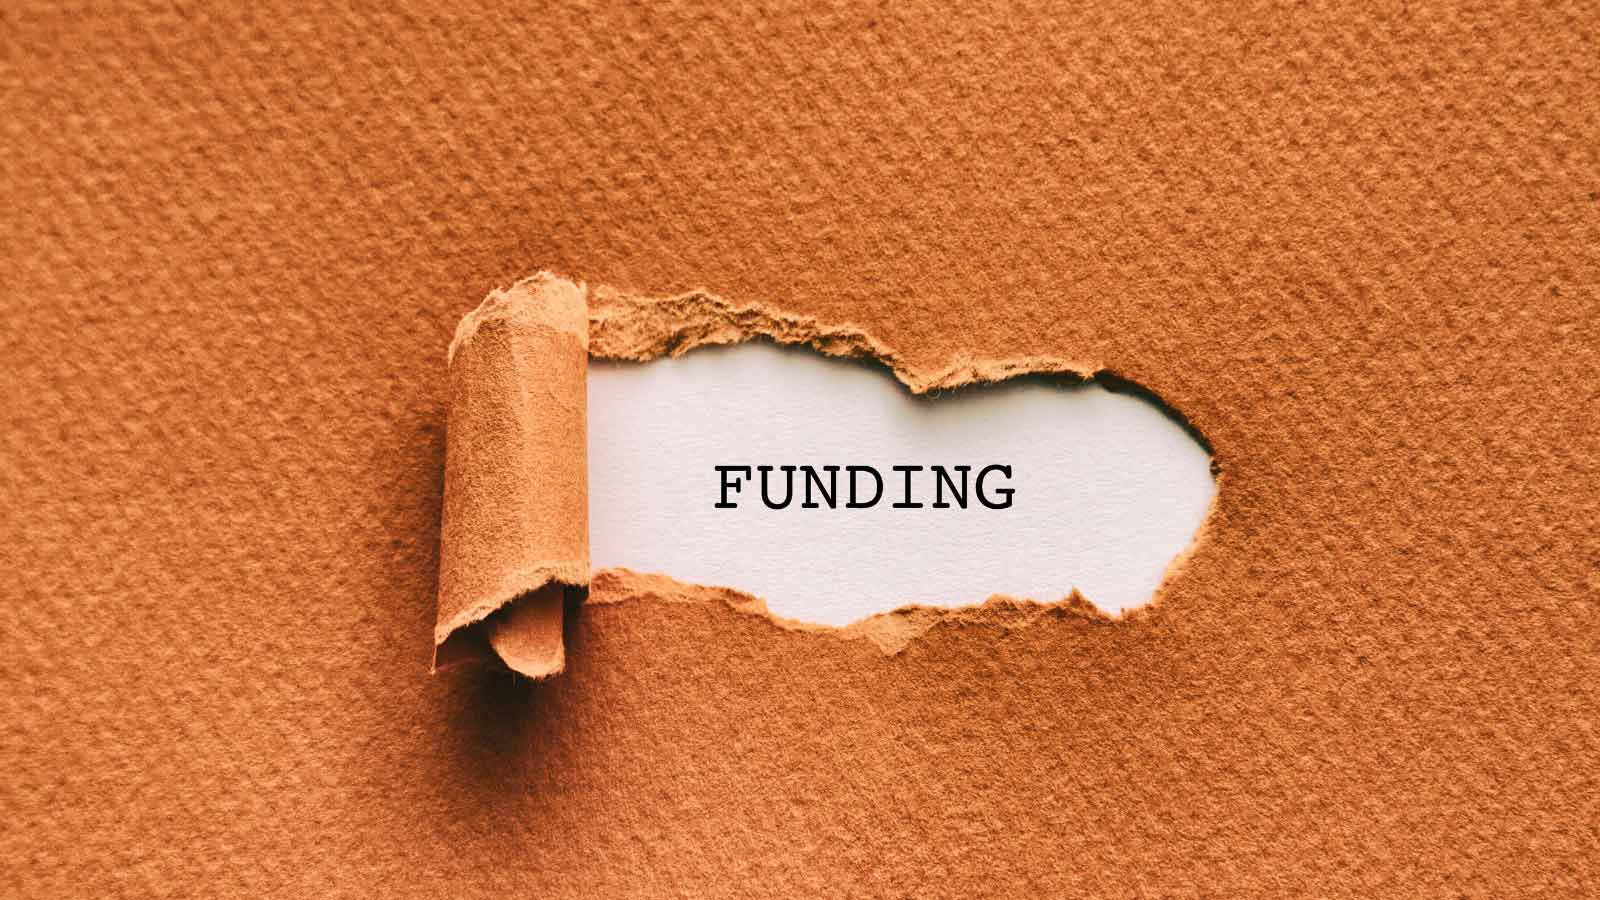 Federal funding is coming